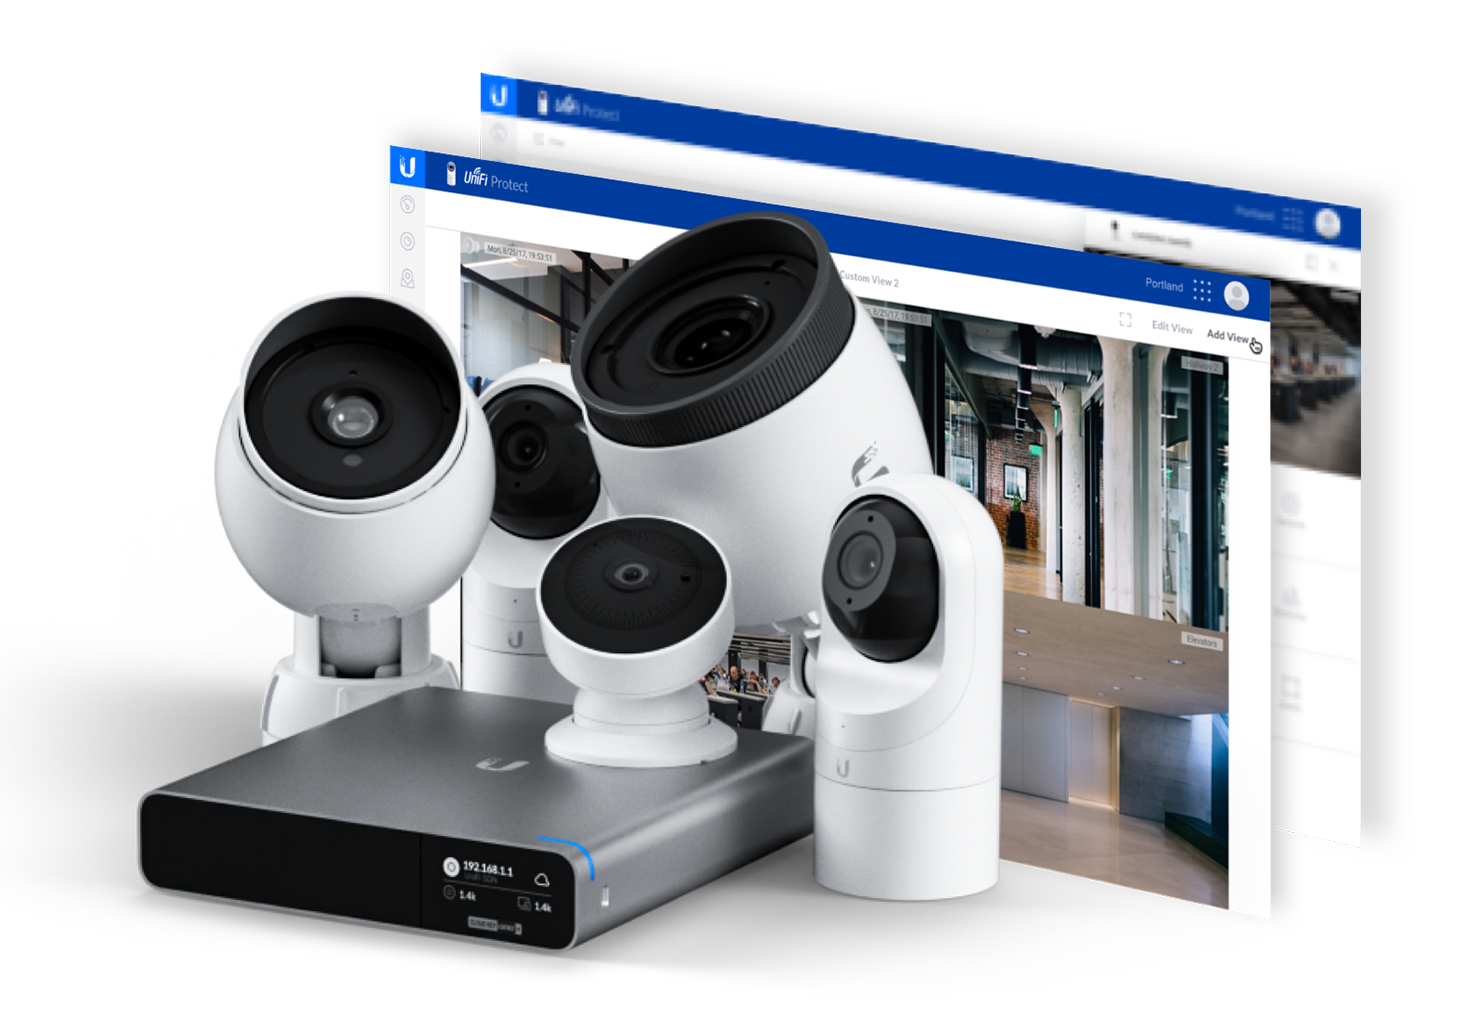 IP video security system